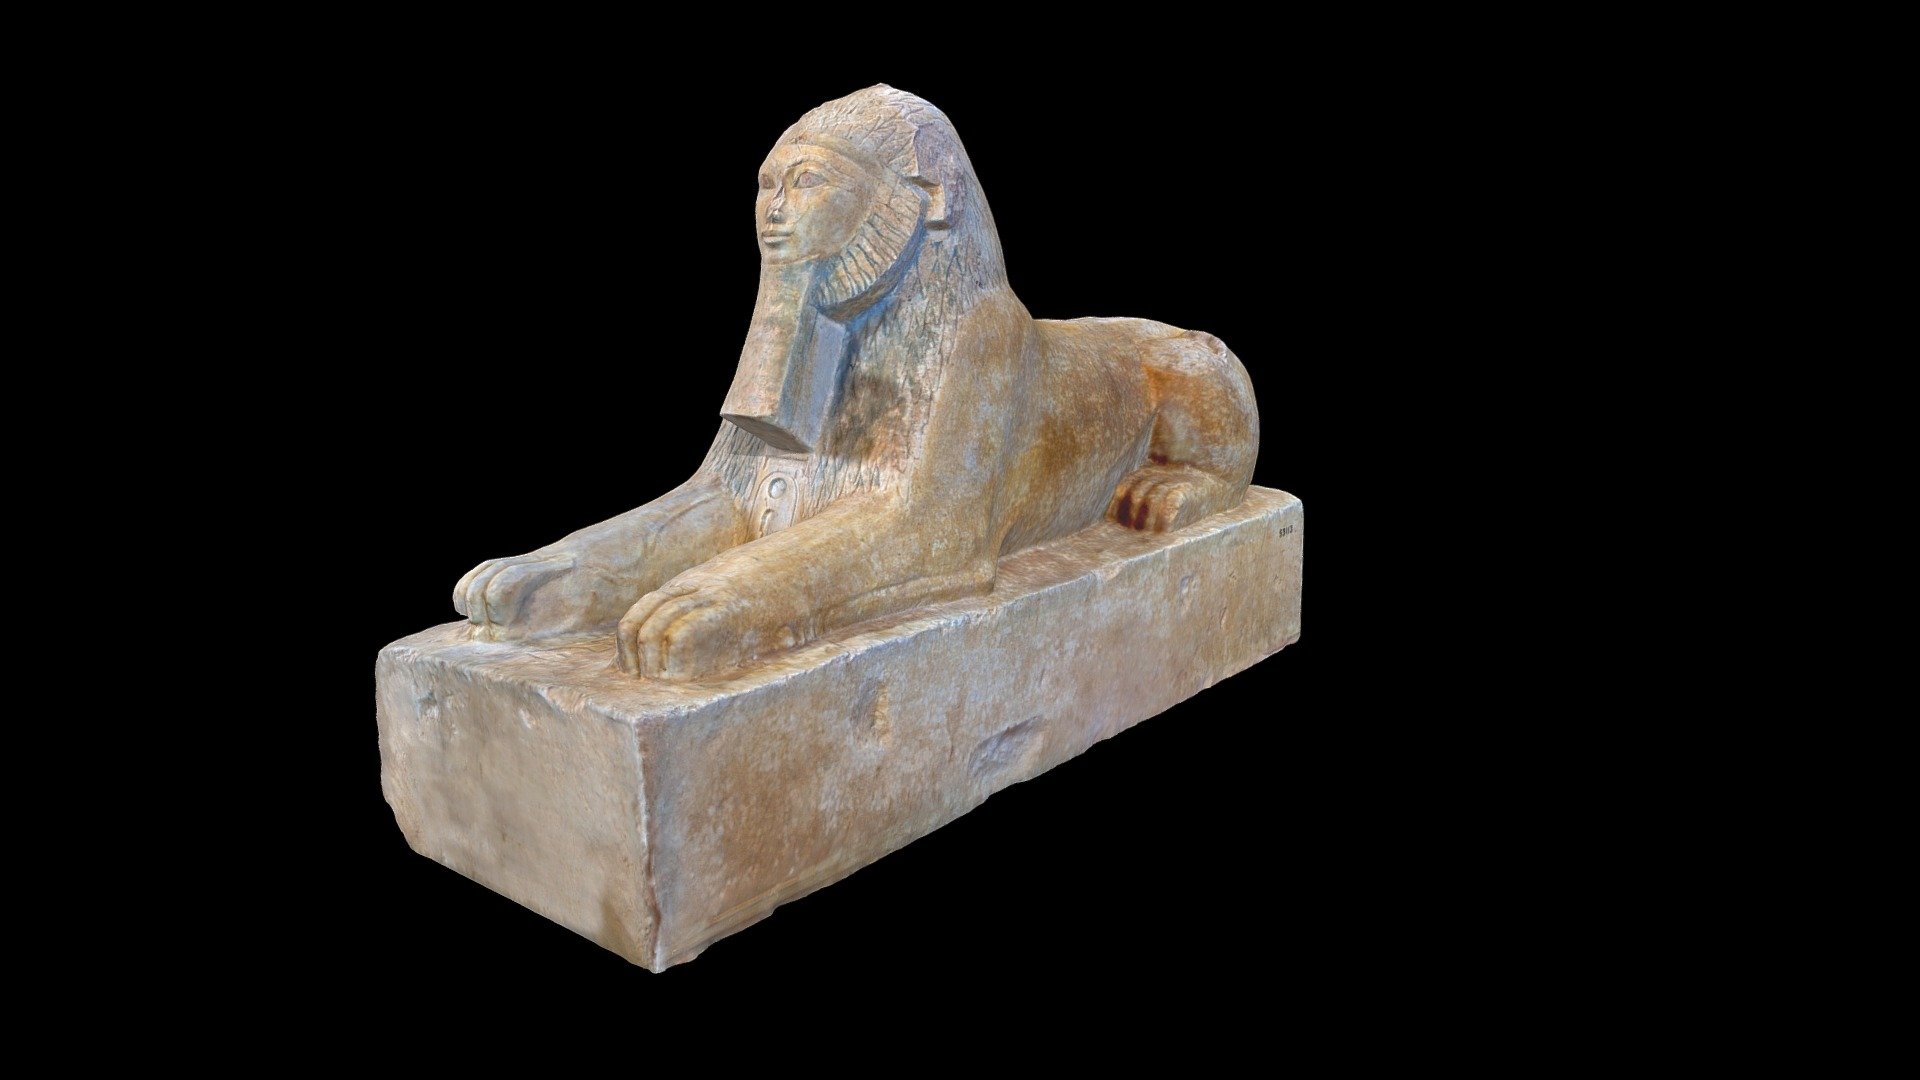 Small painted limestone sphinx of Hatshepsut (18th Dynasty) in the Egyptian Museum Cairo (JE 53113).  This sphinx was excavated from Hatshepsut's mortuary temple at Deir el-Bahri by the Metropolitan Museum of Art Expedition 1928-29.

Created from 156 photographs (Canon EOS Rebel T7i) using Metashape 1.8.3.  Photographed in November 2021 3d model